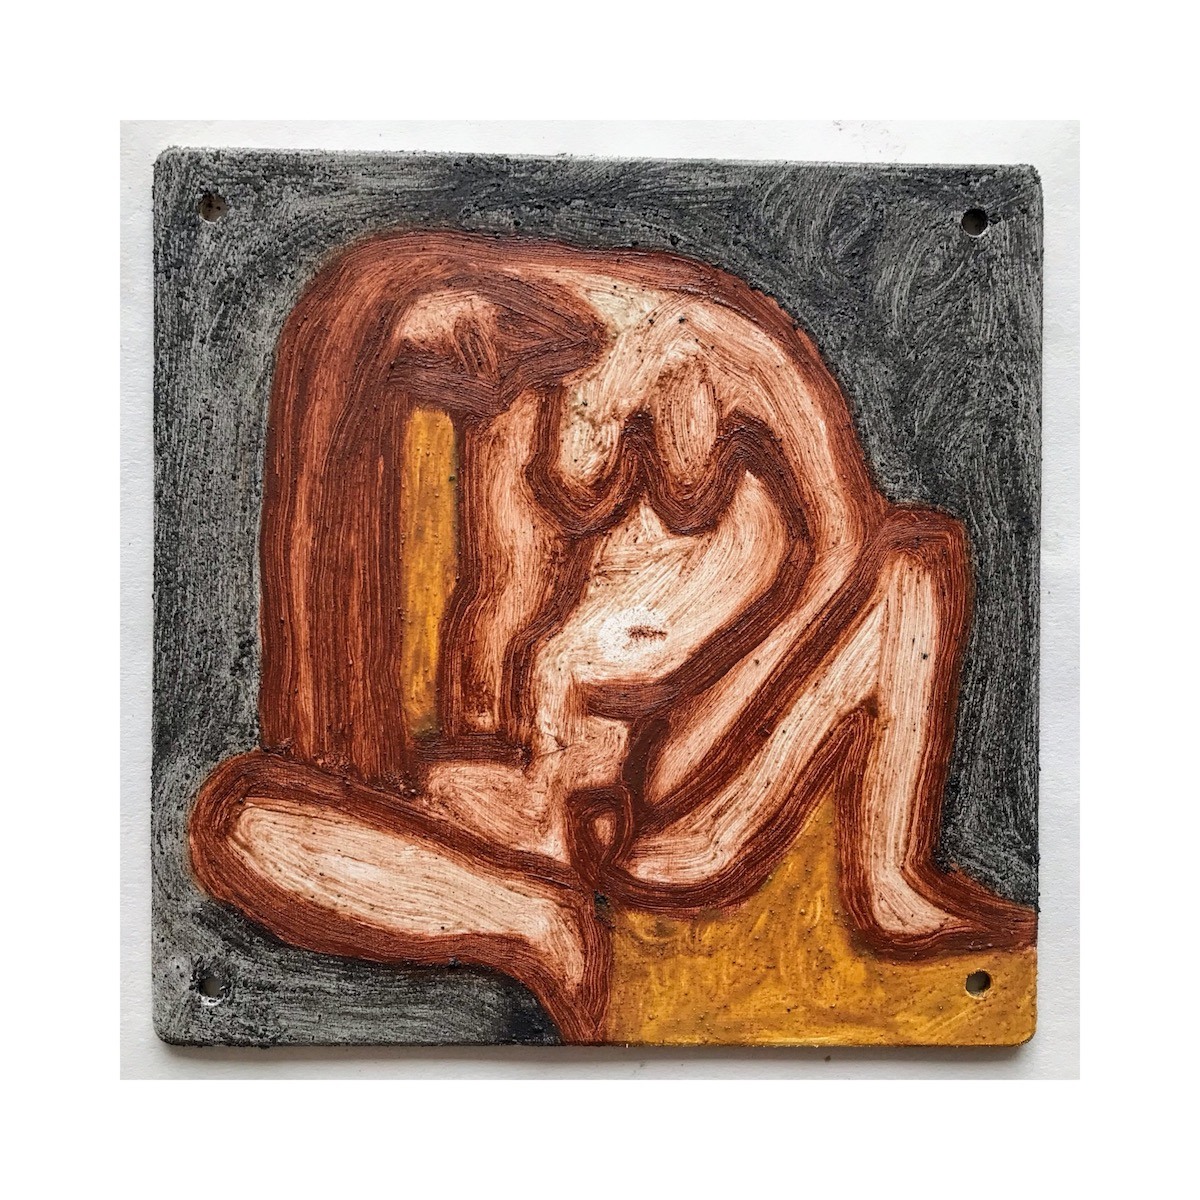 088 woman touching herself (Cornish earth pigments and linseed oil on primed salvaged board; 17x17cm)